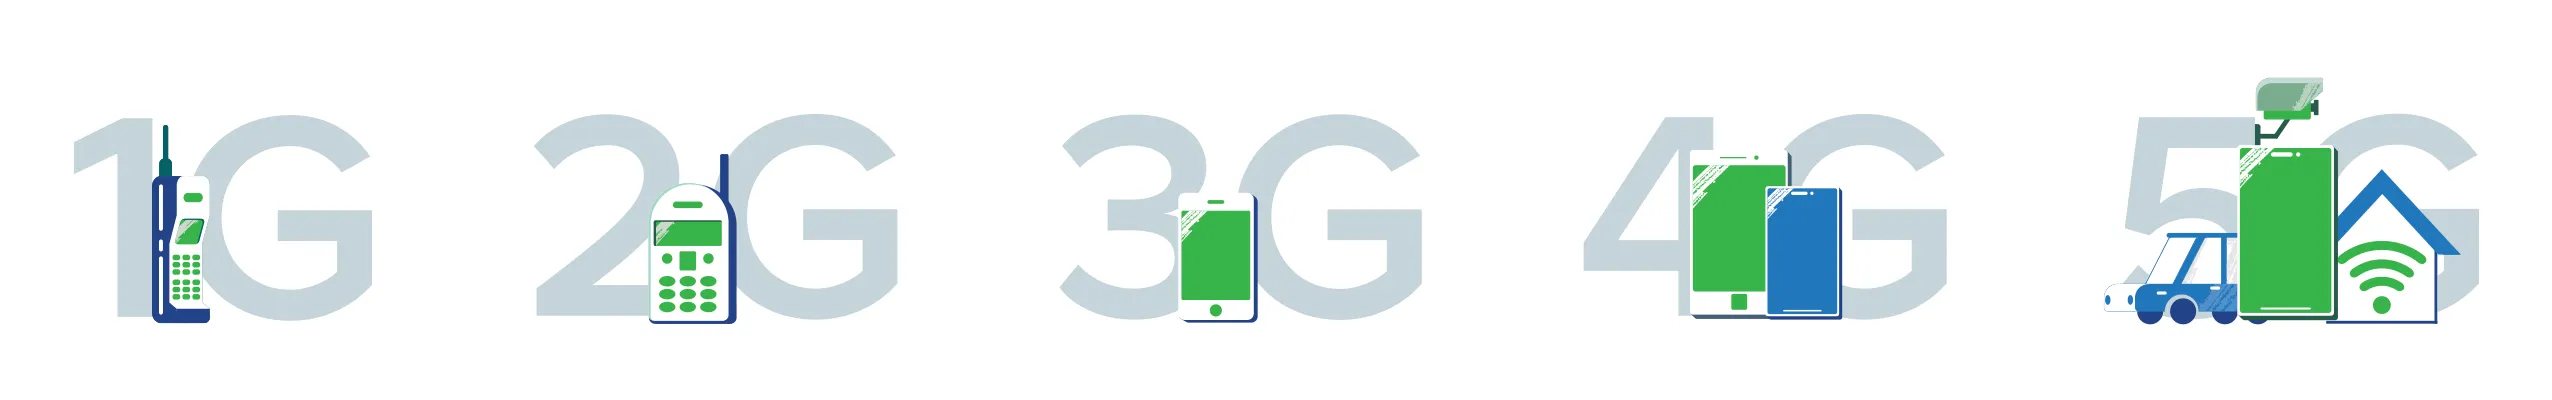 Difference between previous mobile networks and 5G?